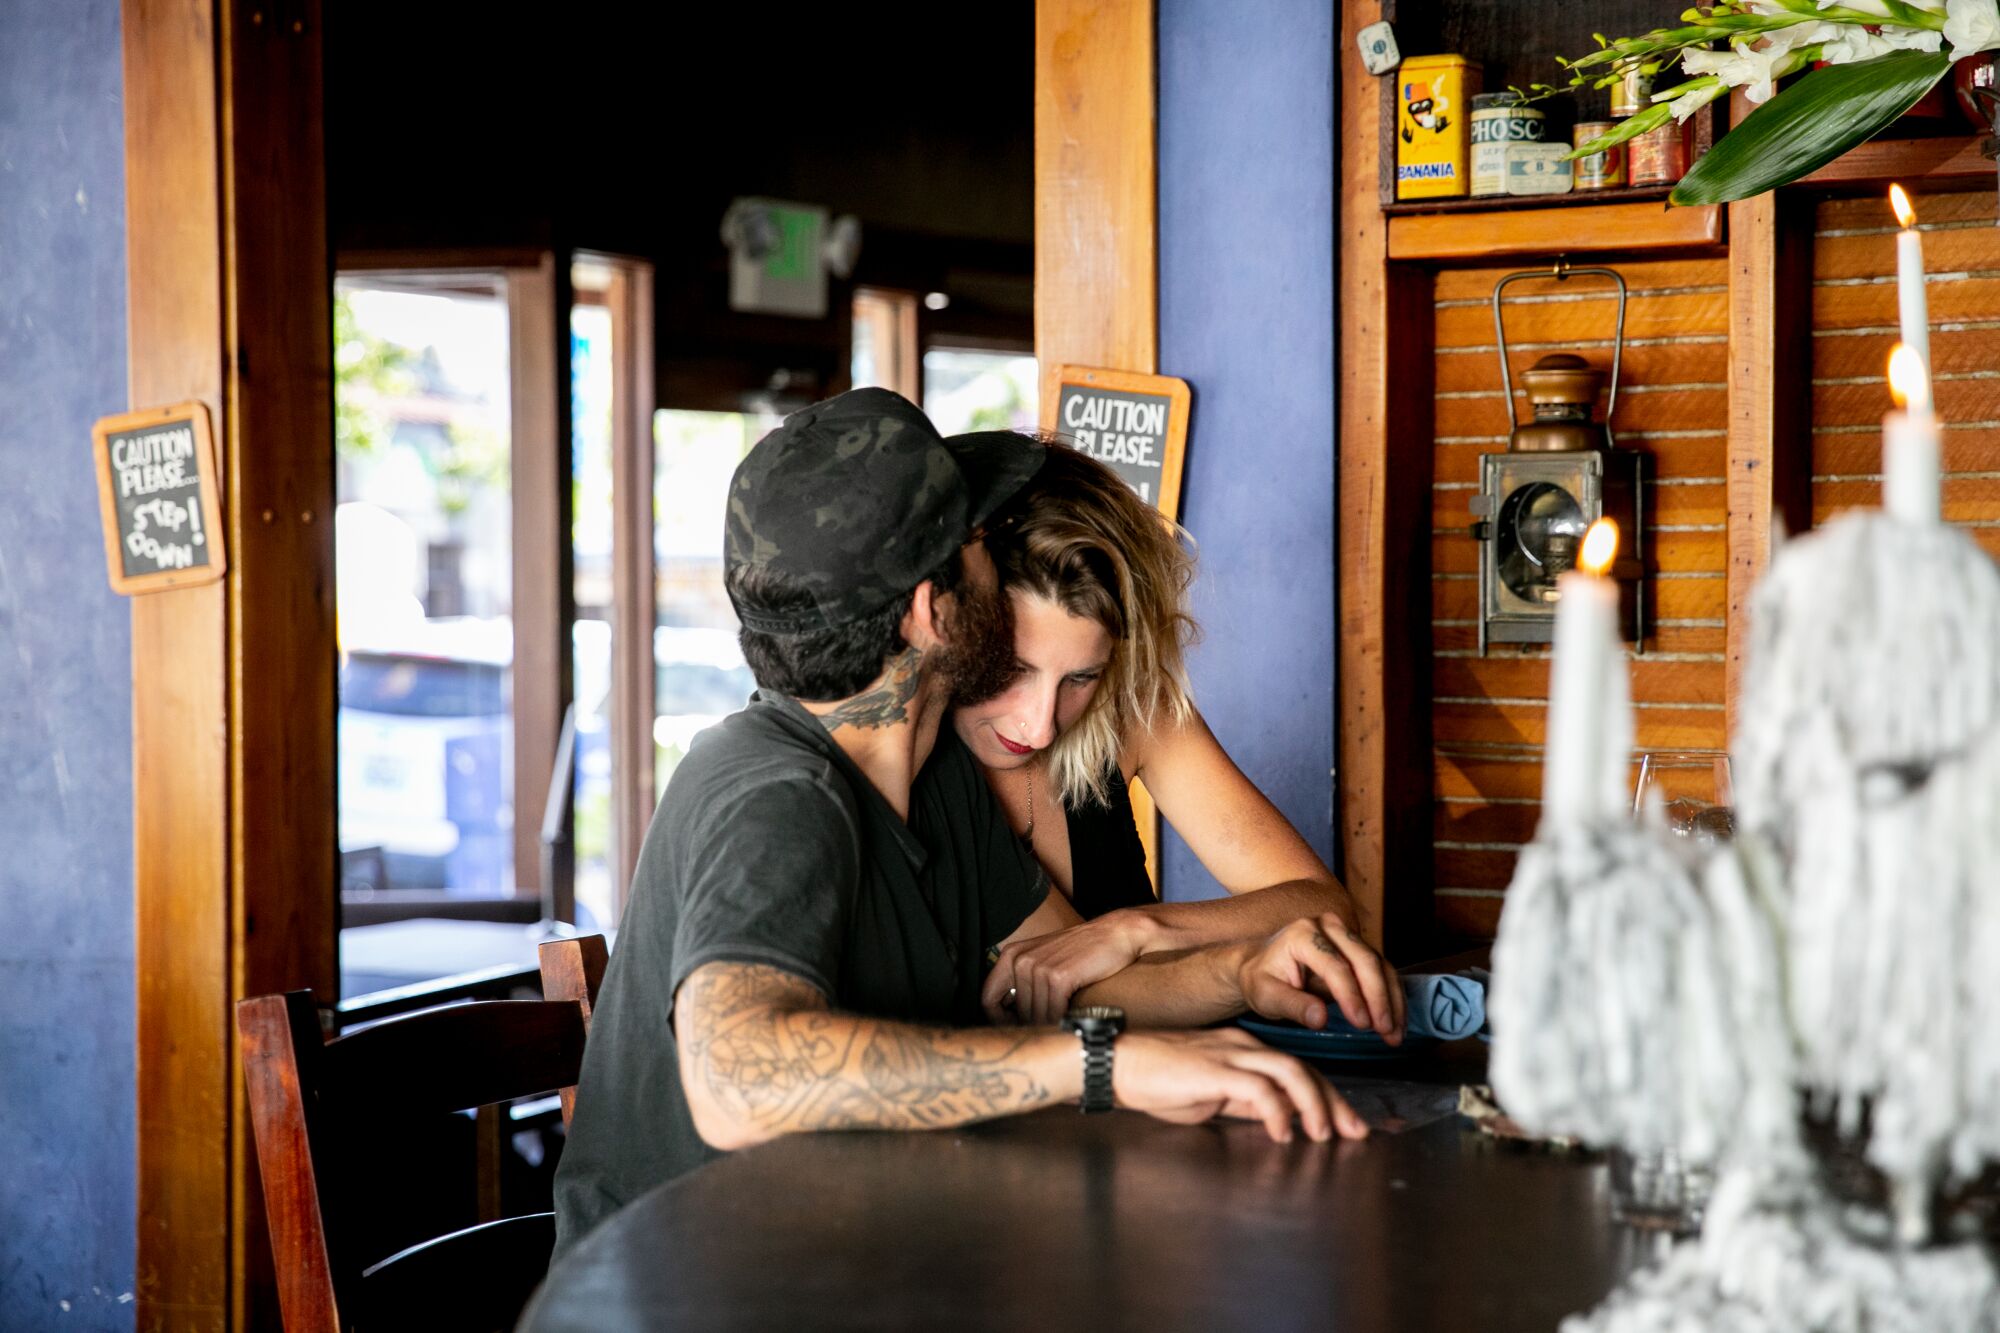 Customers Dan Lopez and Sara Minter share a quiet moment at Bleu Boheme while sitting at the bar as the restaurant reopens in the Kensington neighborhood on May 21, 2020 in San Diego, California. Restaurants began reopening for dine-in patrons on Thursday as the state and county began easing restrictions imposed during the coronavirus pandemic.